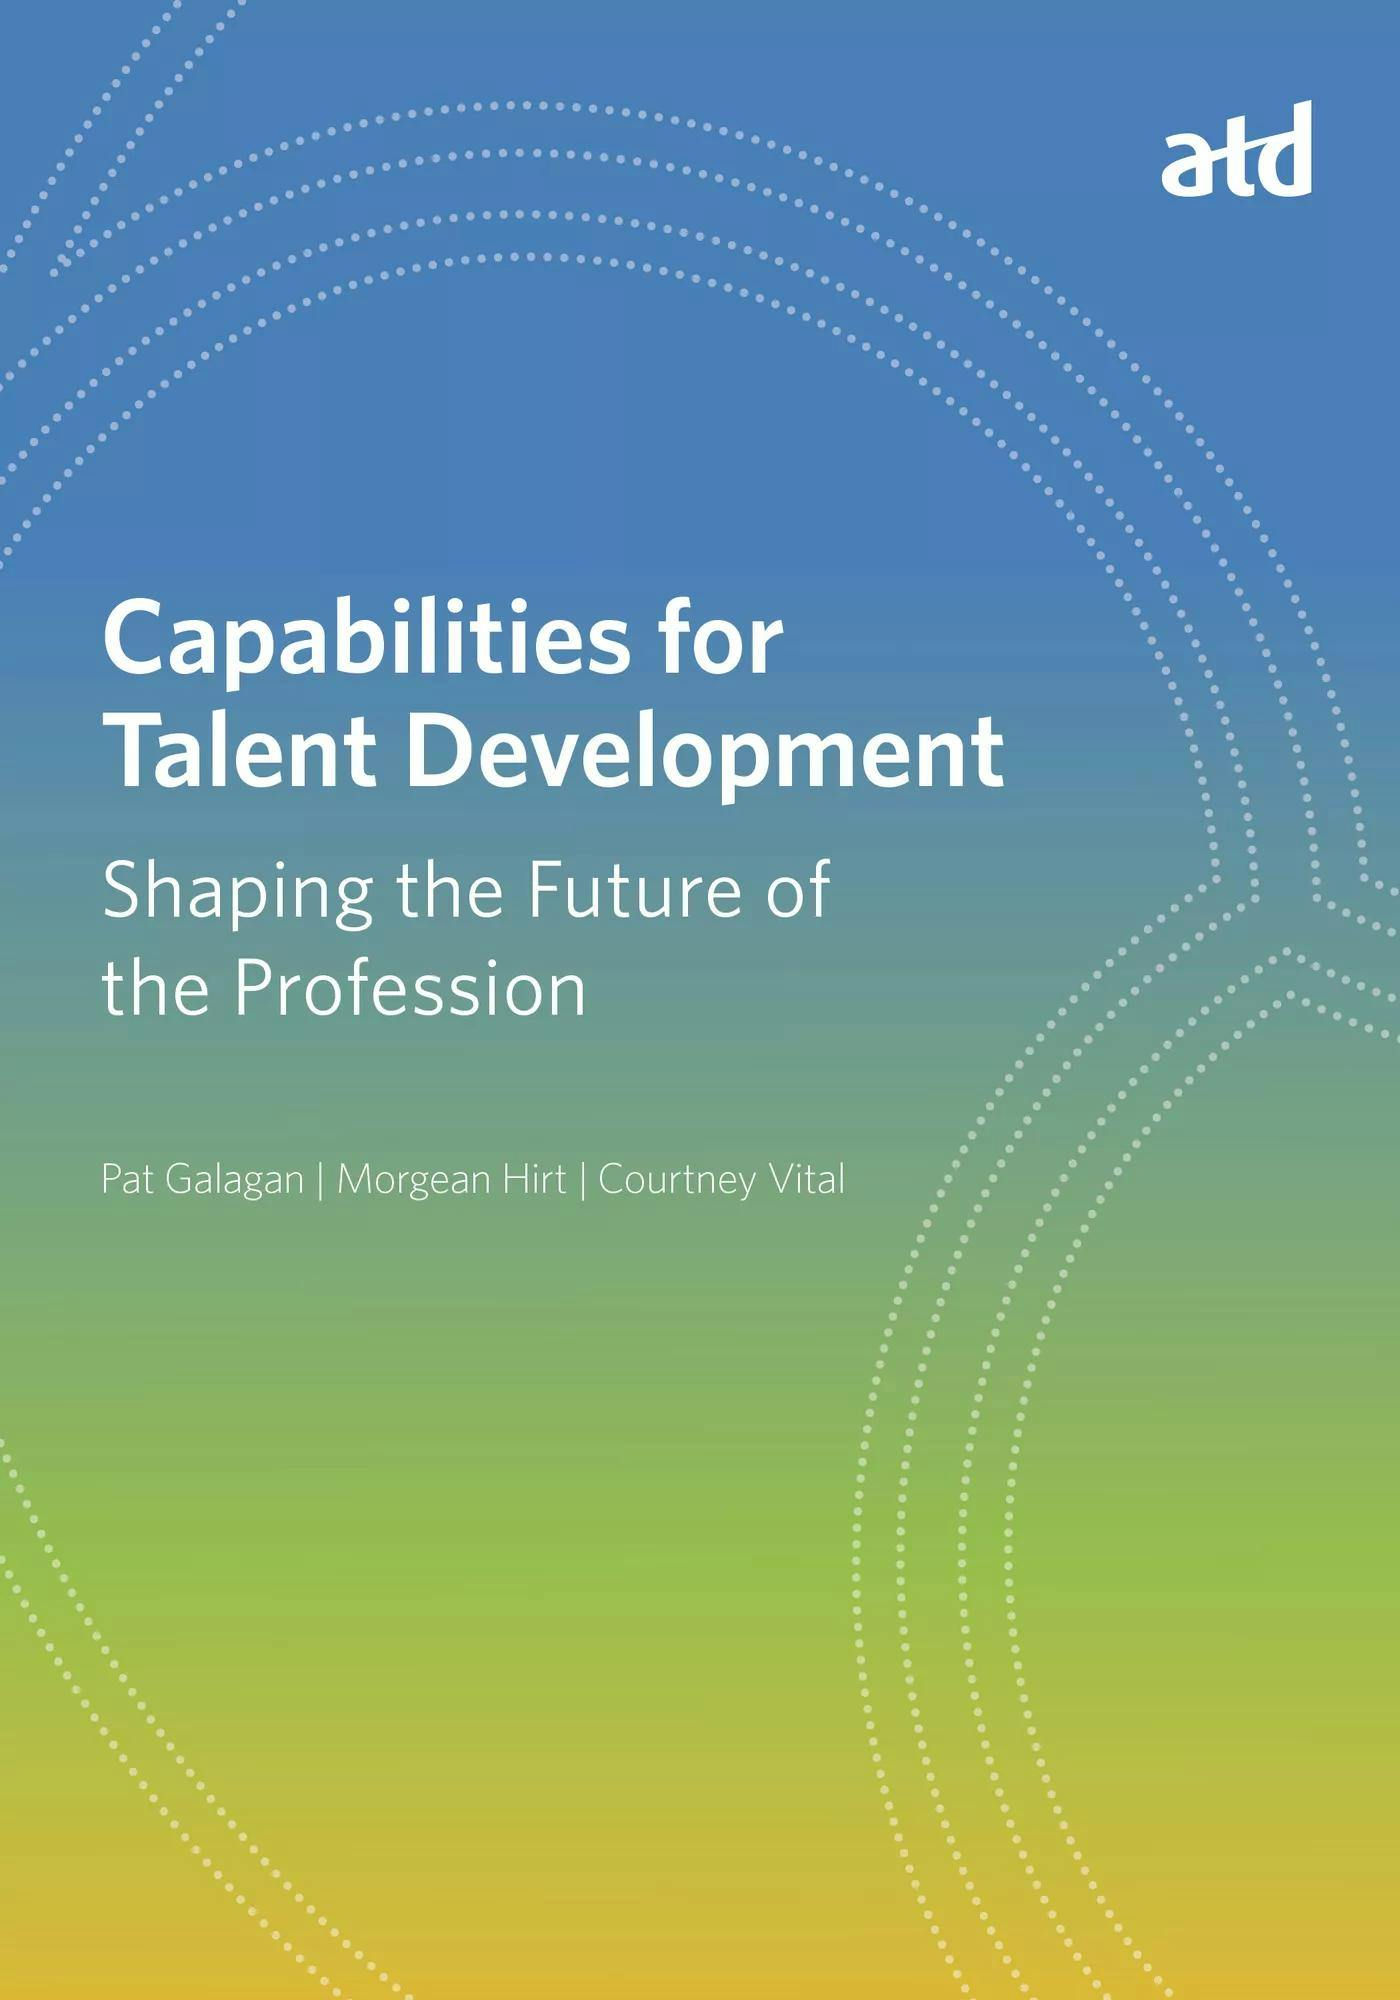 111920_Capabilities for Talent Development_Cover_RGB